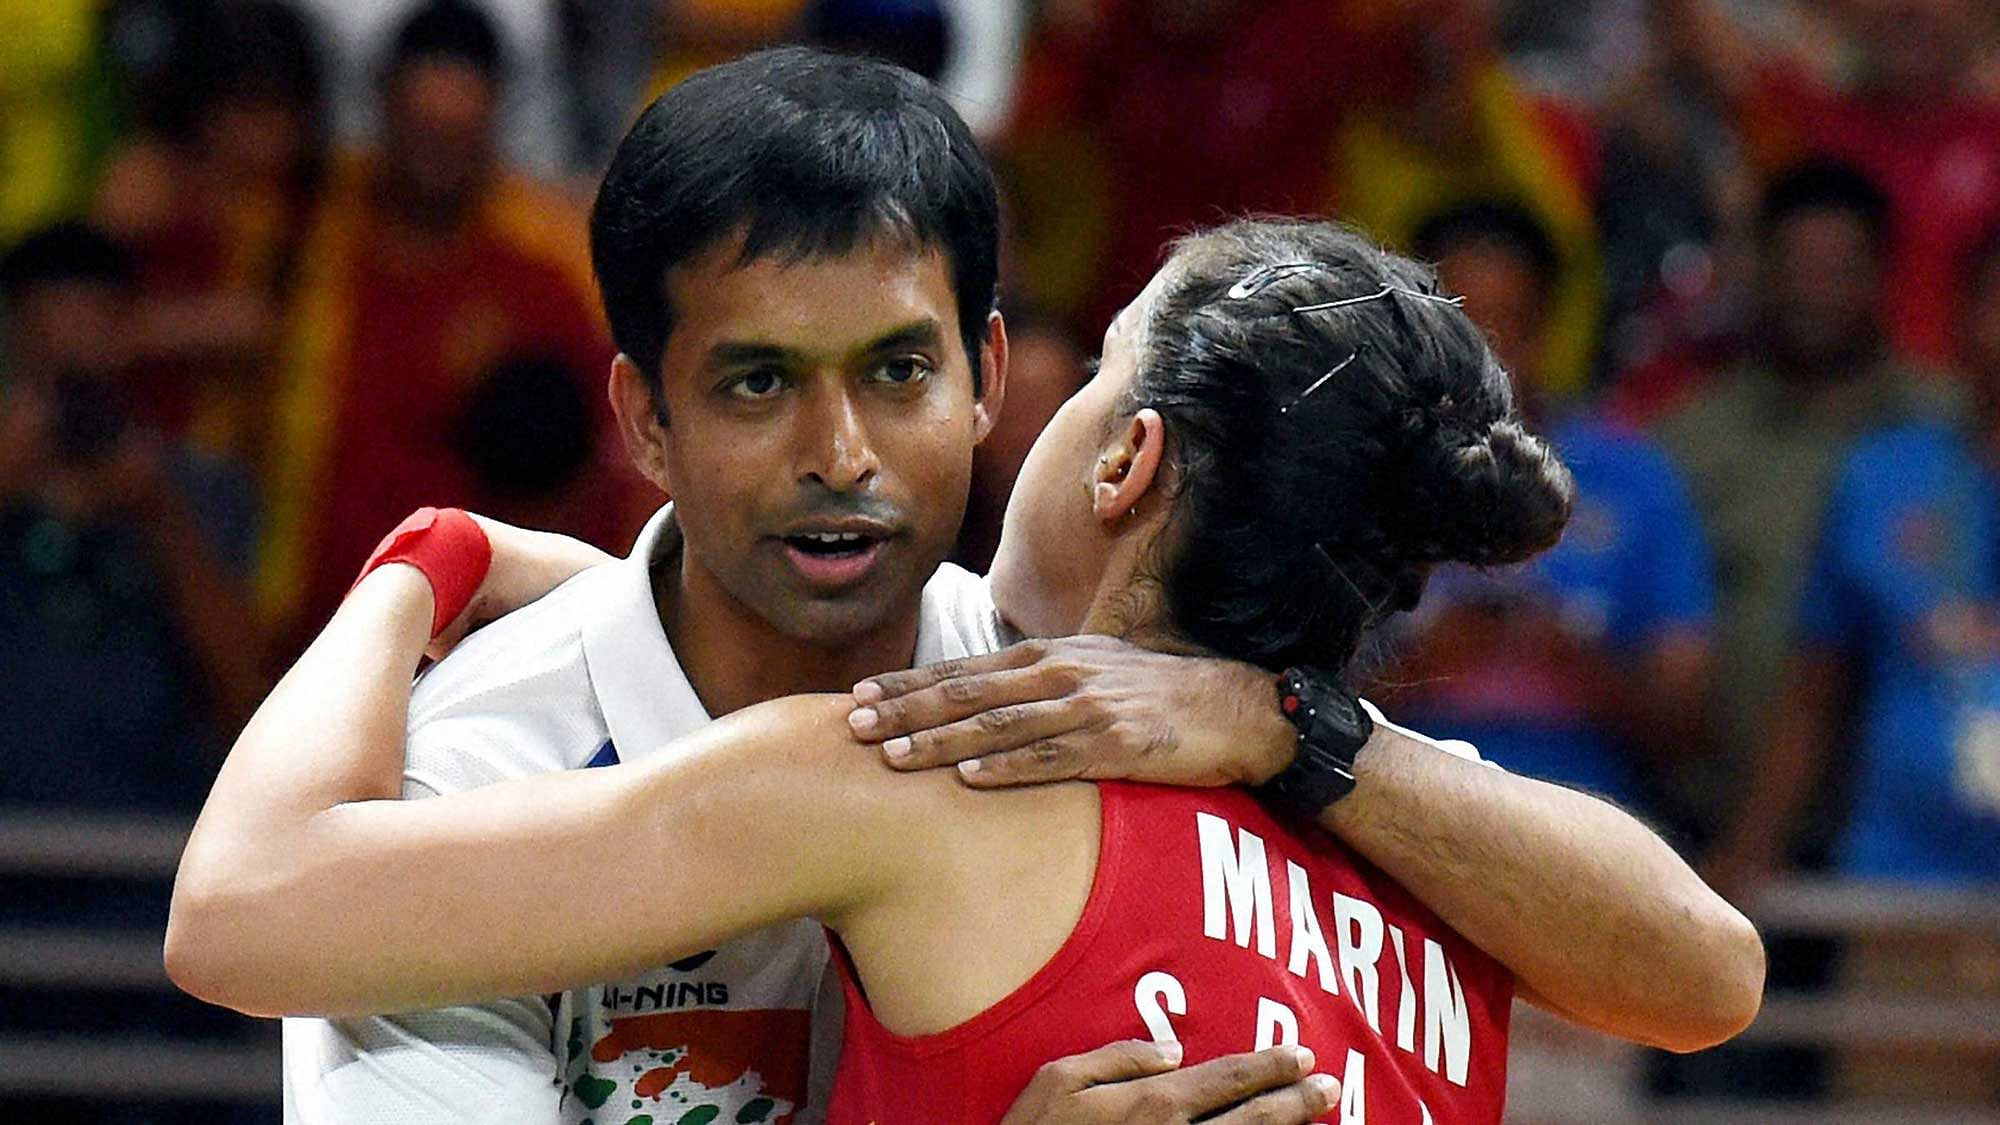 Pullella Gopichand has shared the hurt he felt when his protege Saina Nehwal left his academy to join Prakash Padukone’s facility.